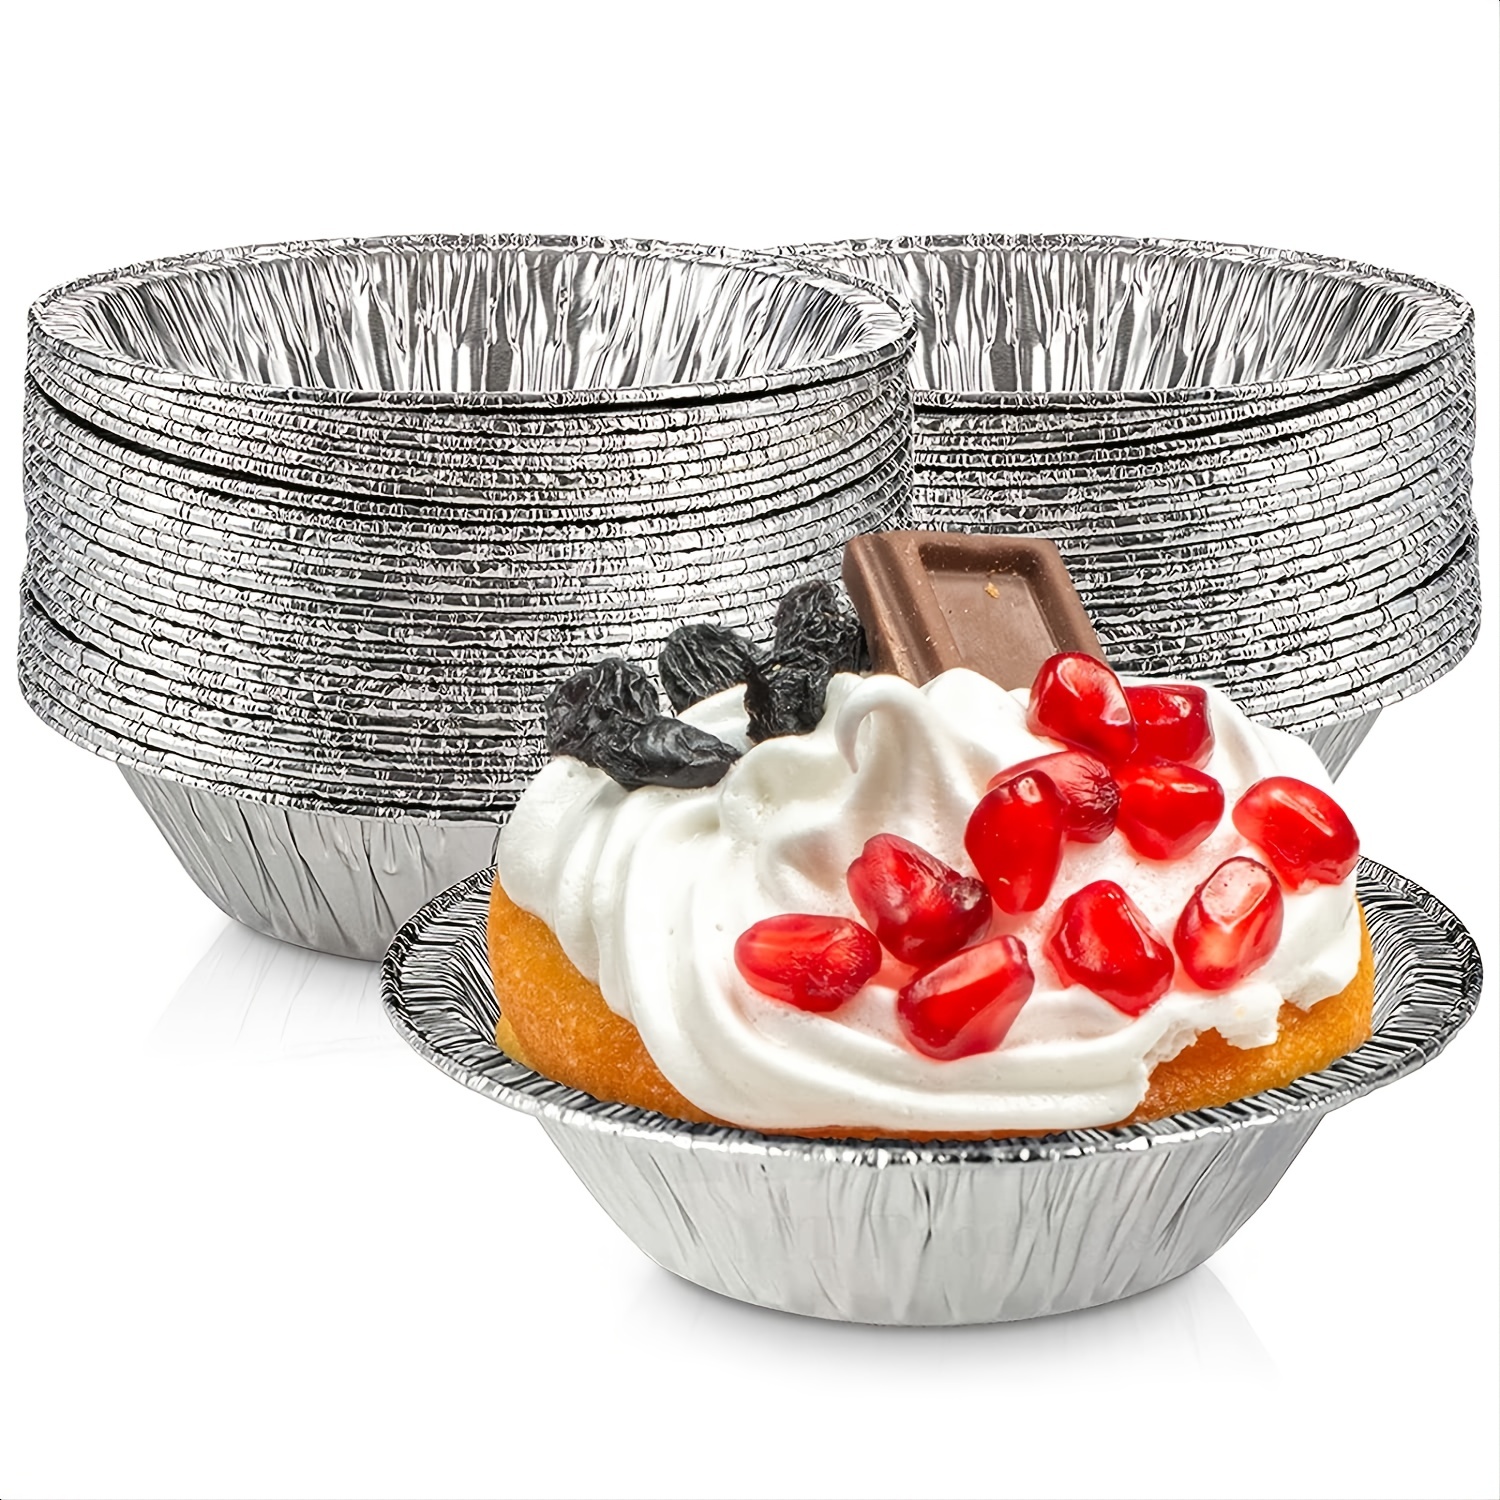 Just Partyware 20-Pack Muffin Pans Disposable Aluminum Foil 6-Cup Standard  Size Tin for Baking Cupcakes, Mini Pies and Quiche, Souffle